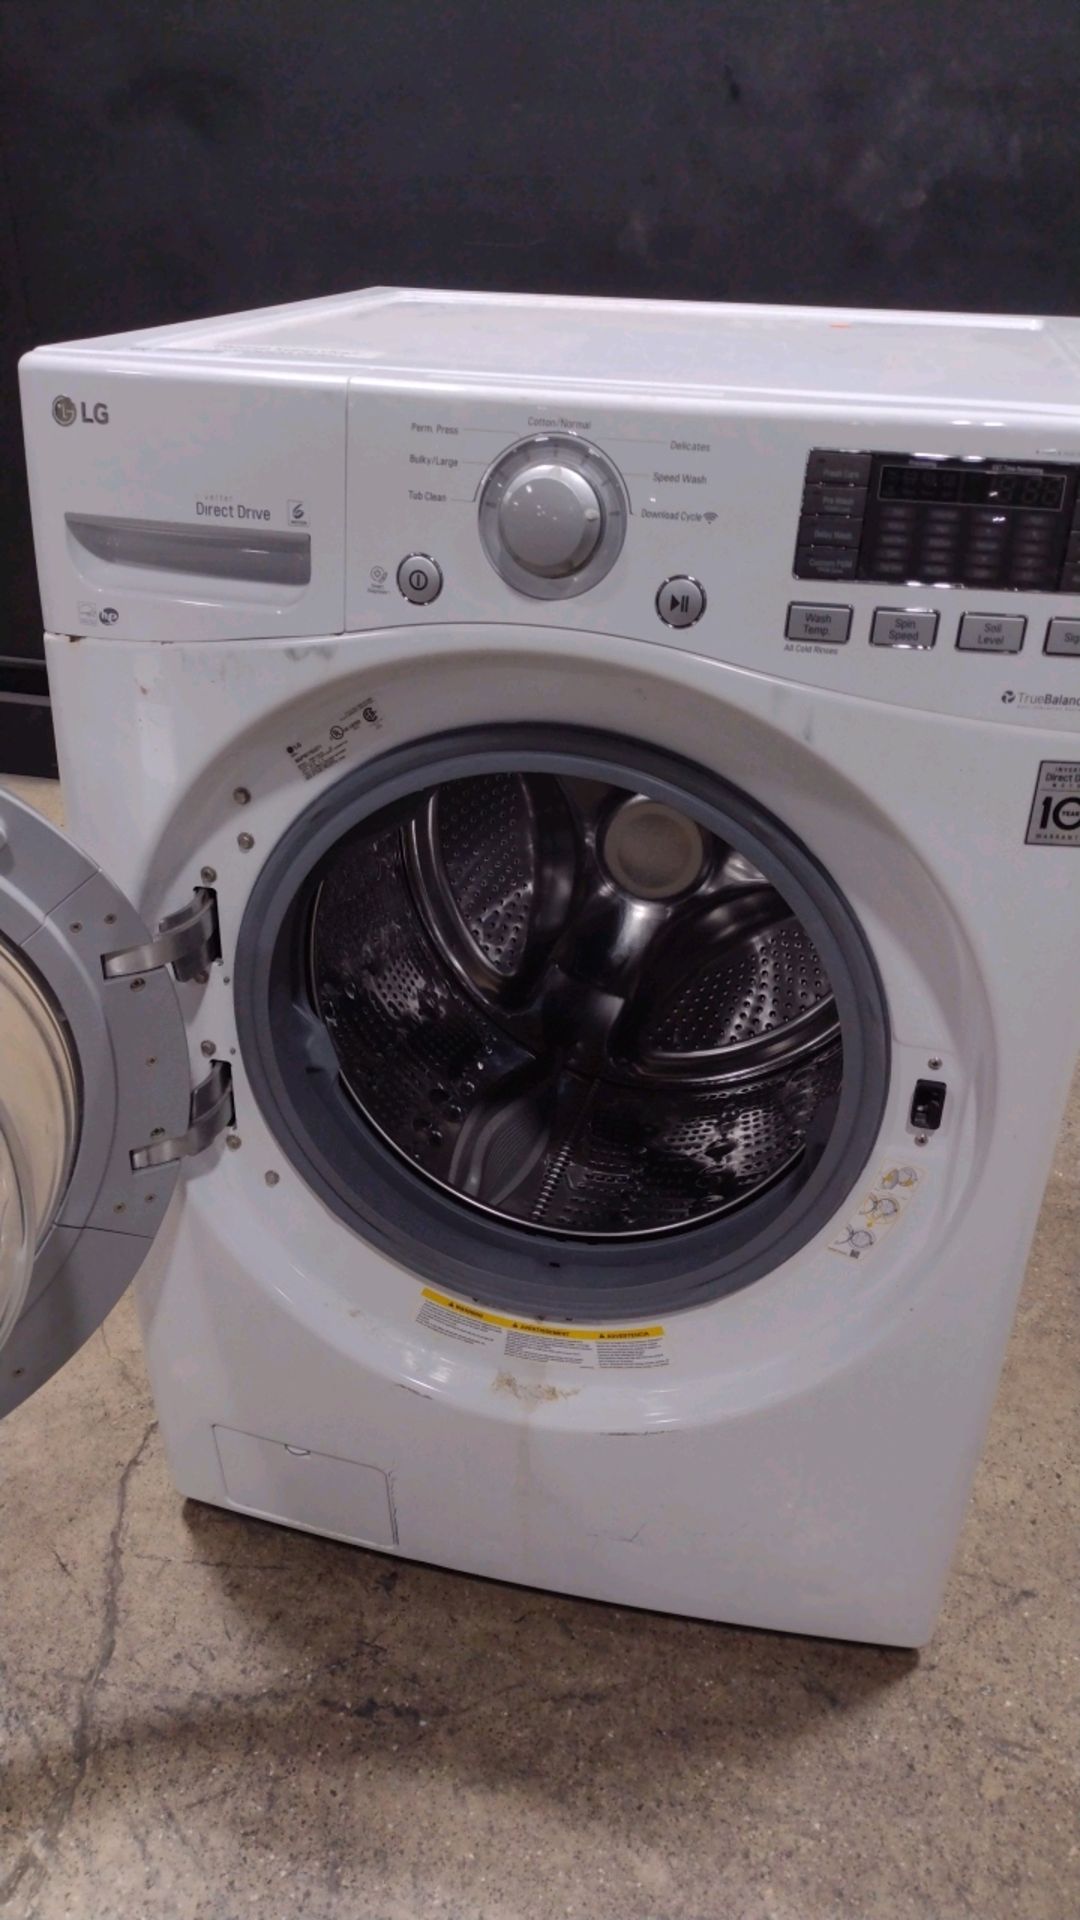 LG WM3170CW WASHER MACHINE (LOCATED AT 3325 MOUNT PROSPECT ROAD, FRANKLIN PARK, IL, 60131) - Image 2 of 3